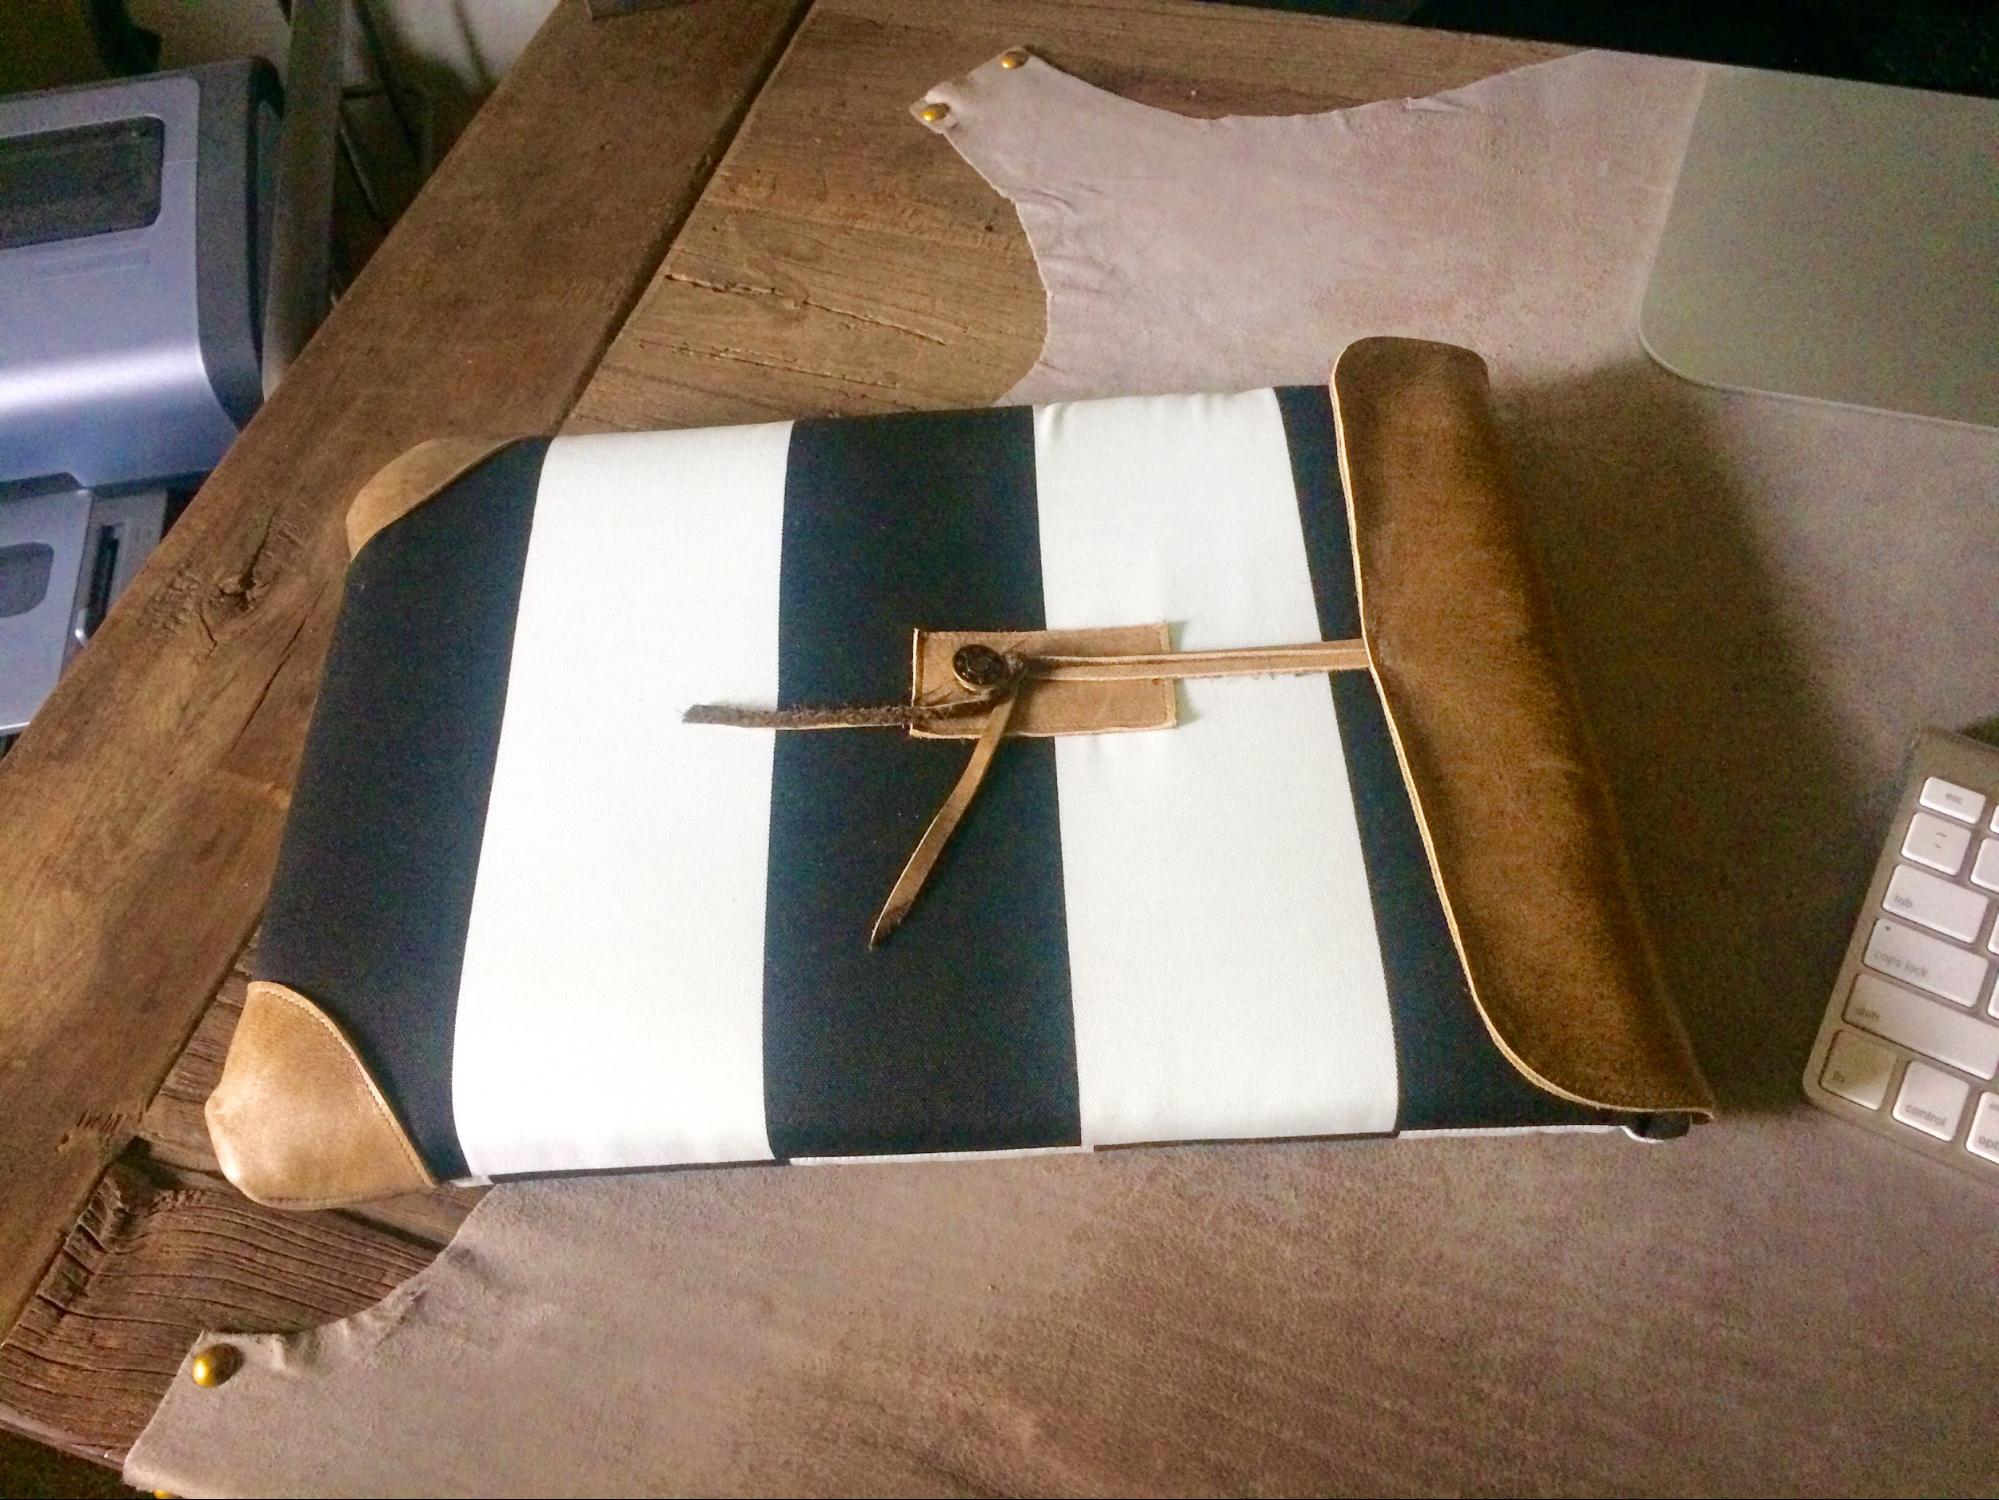 How to Make a Laptop Sleeve